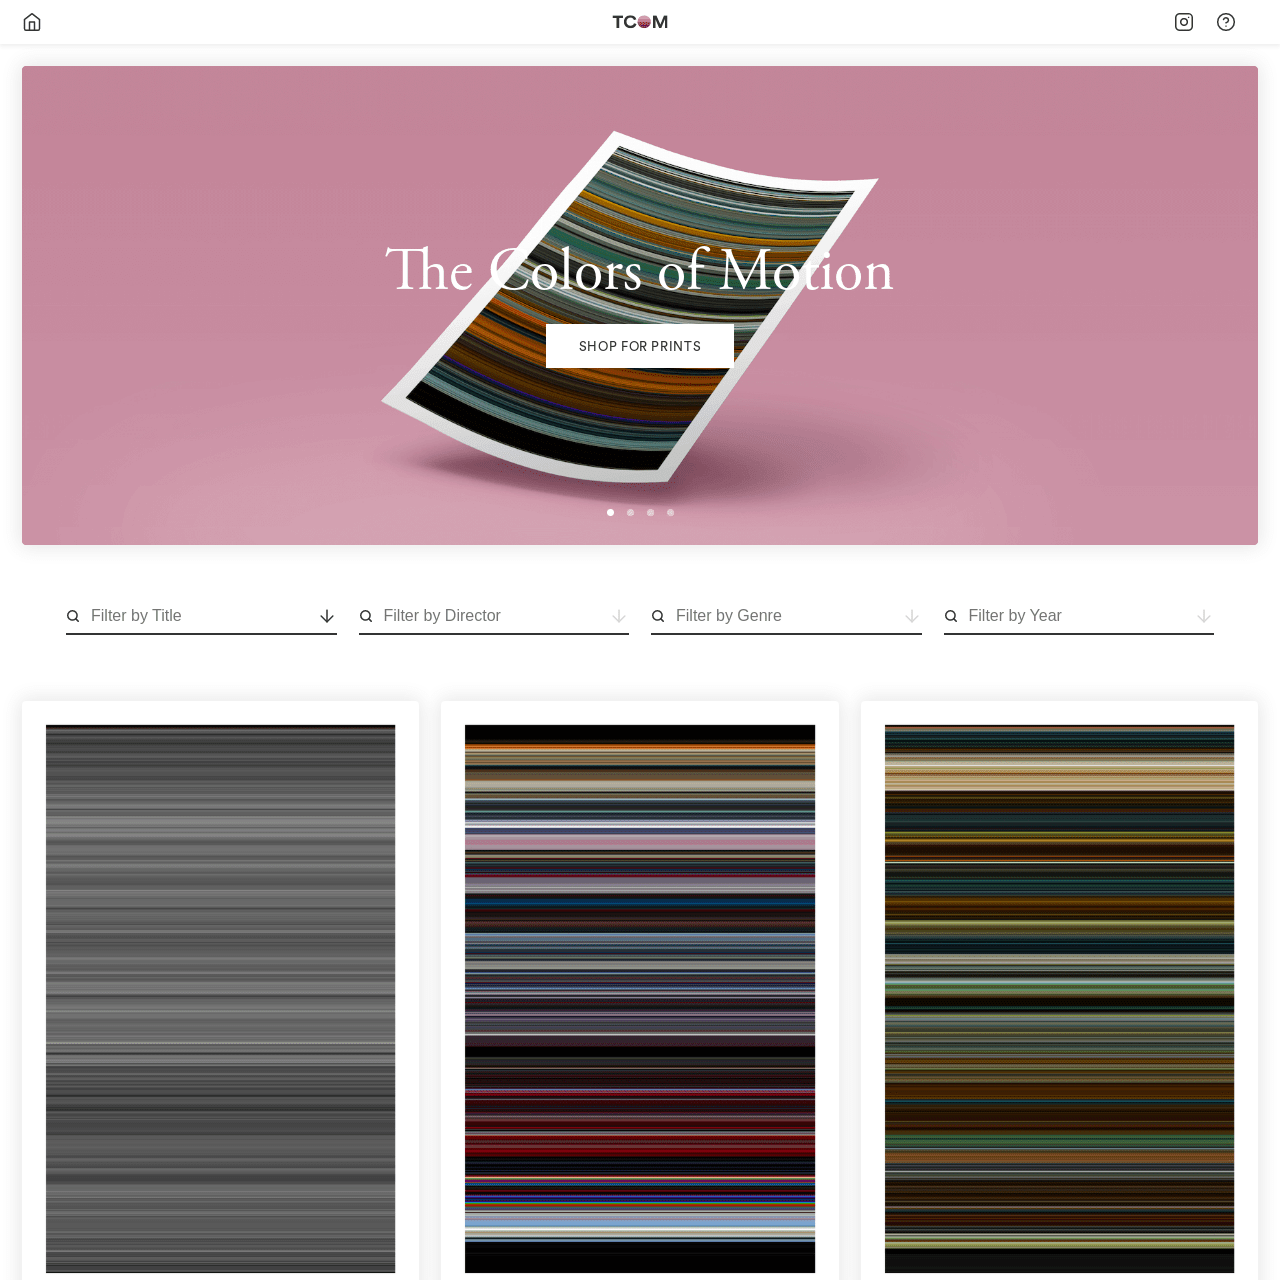 Screenshot of The Colors of Motion website